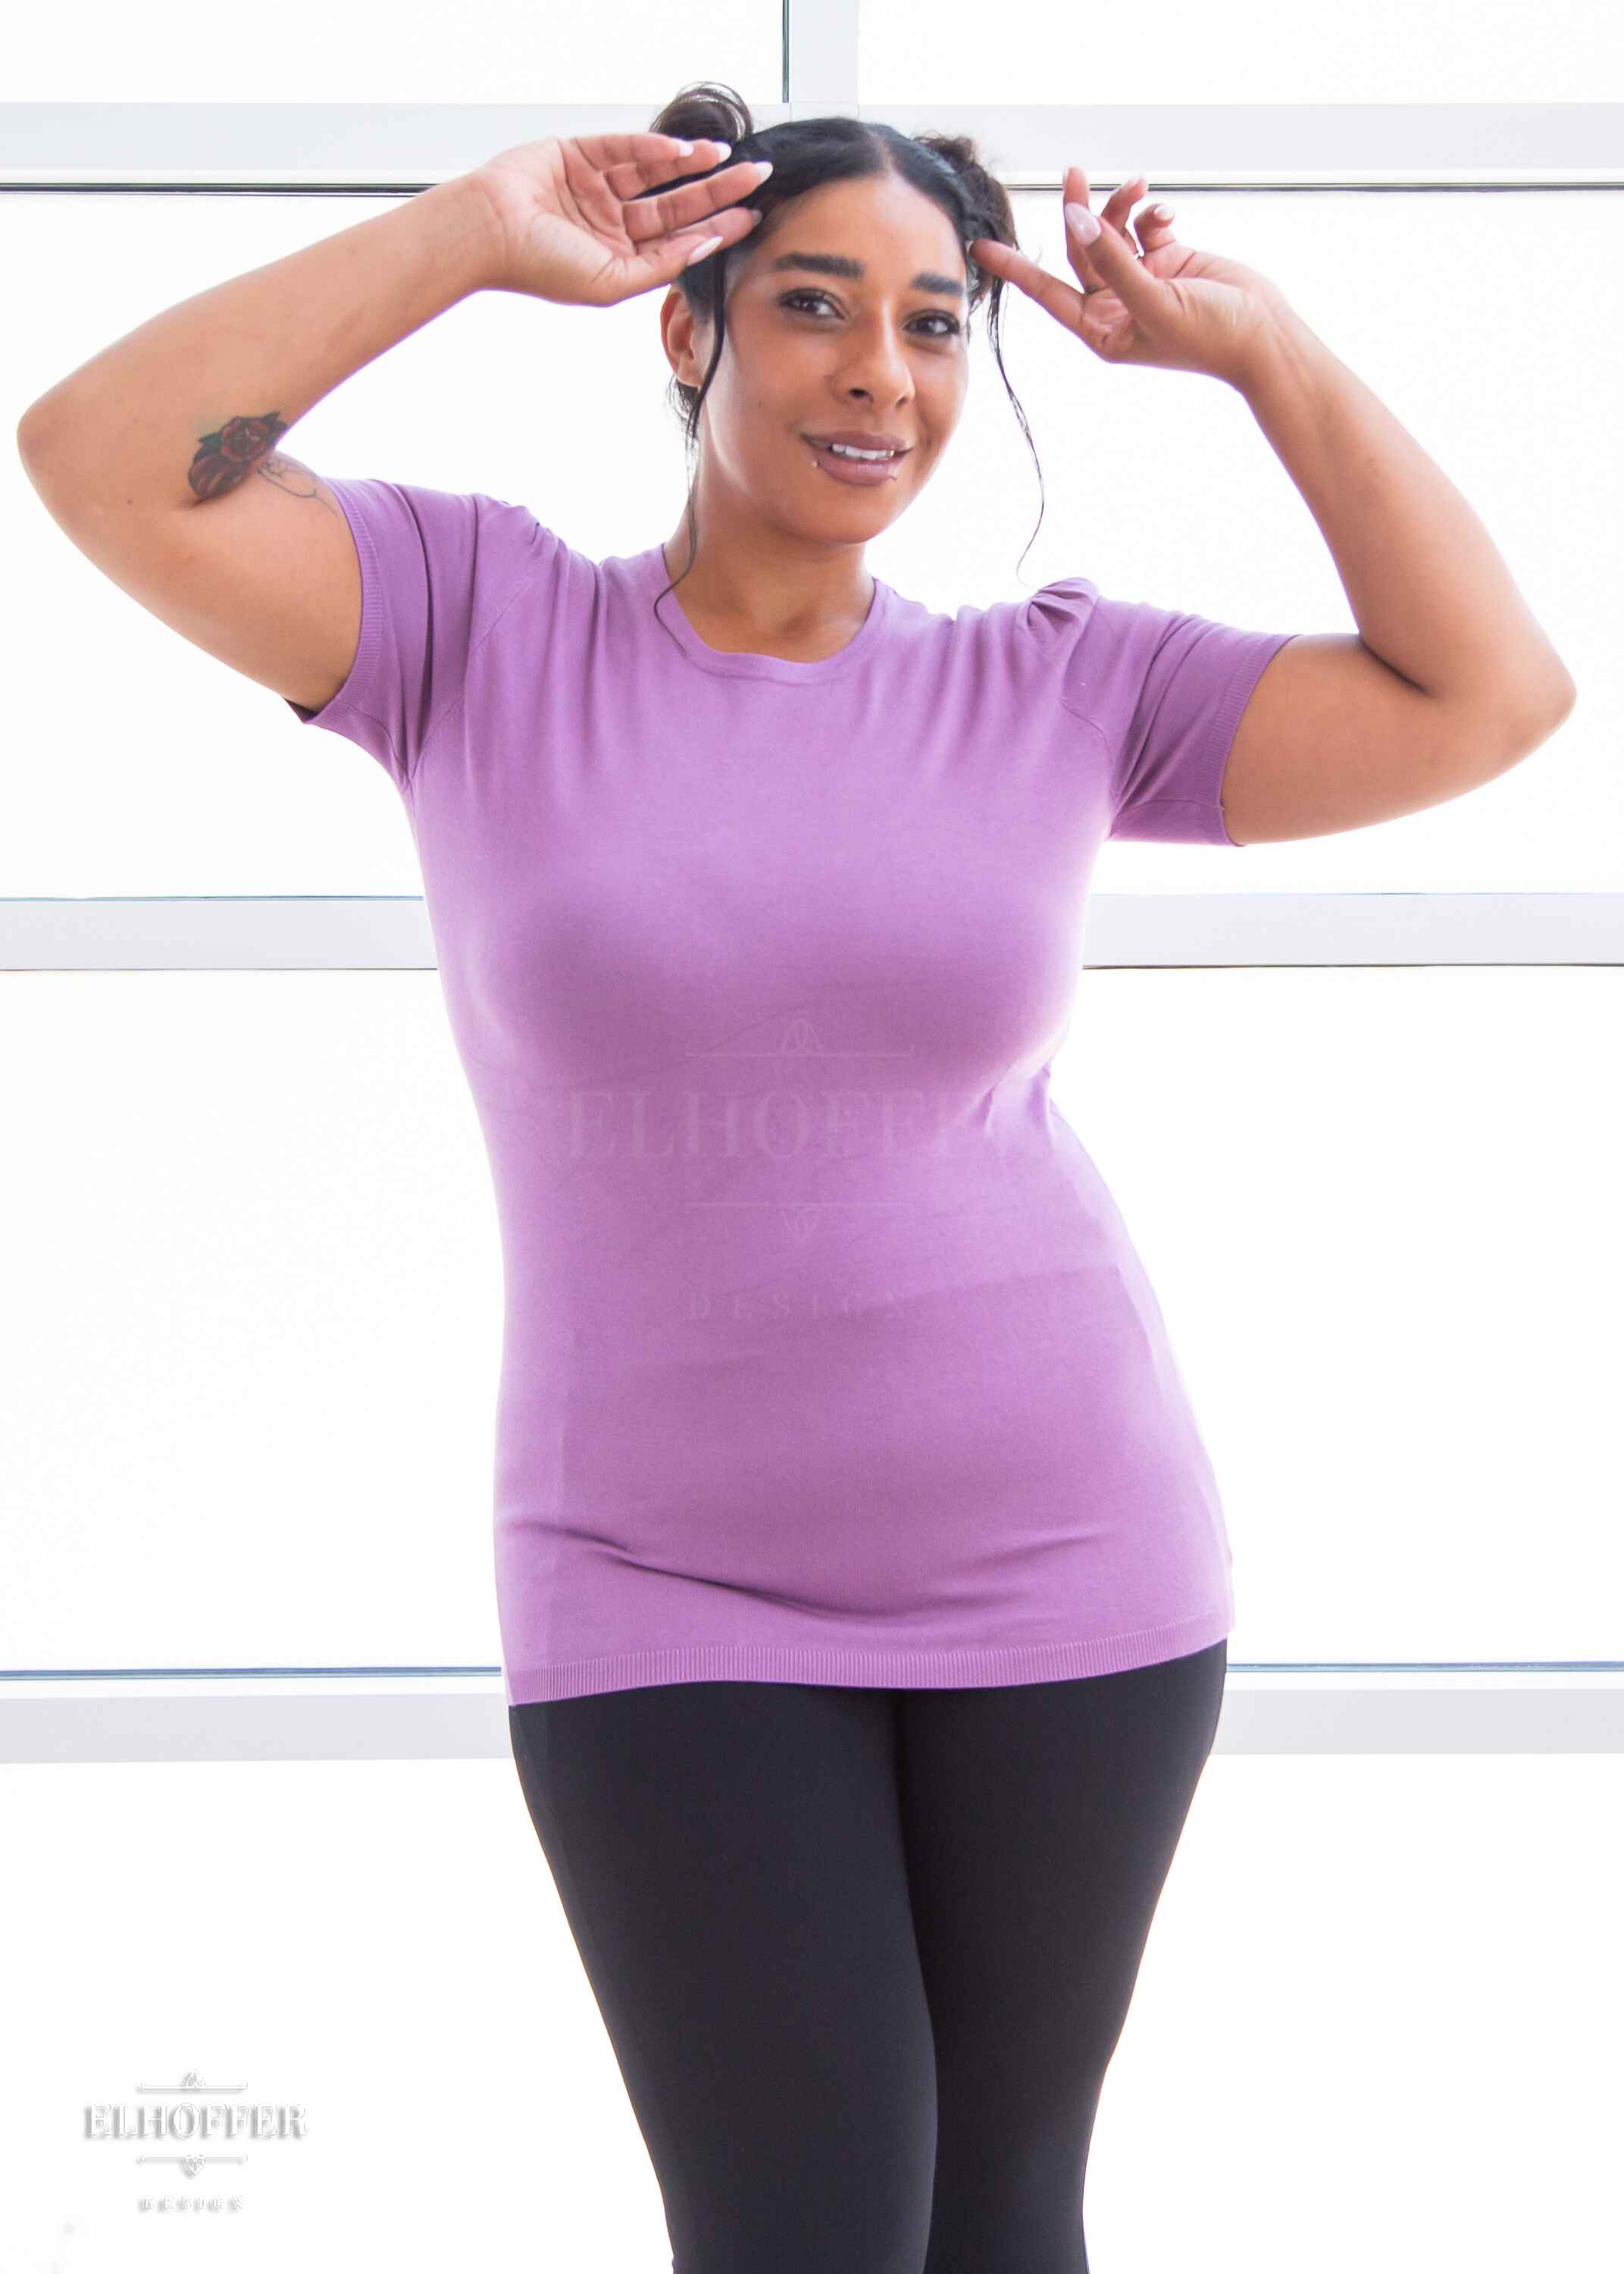 Janae, a light brown skinned L model with dark hair up in space buns, is wearing a short sleeve light weight soft purple knit top. The top hits about mid hip in length and the sleeves have pleated gathering at the shoulders.